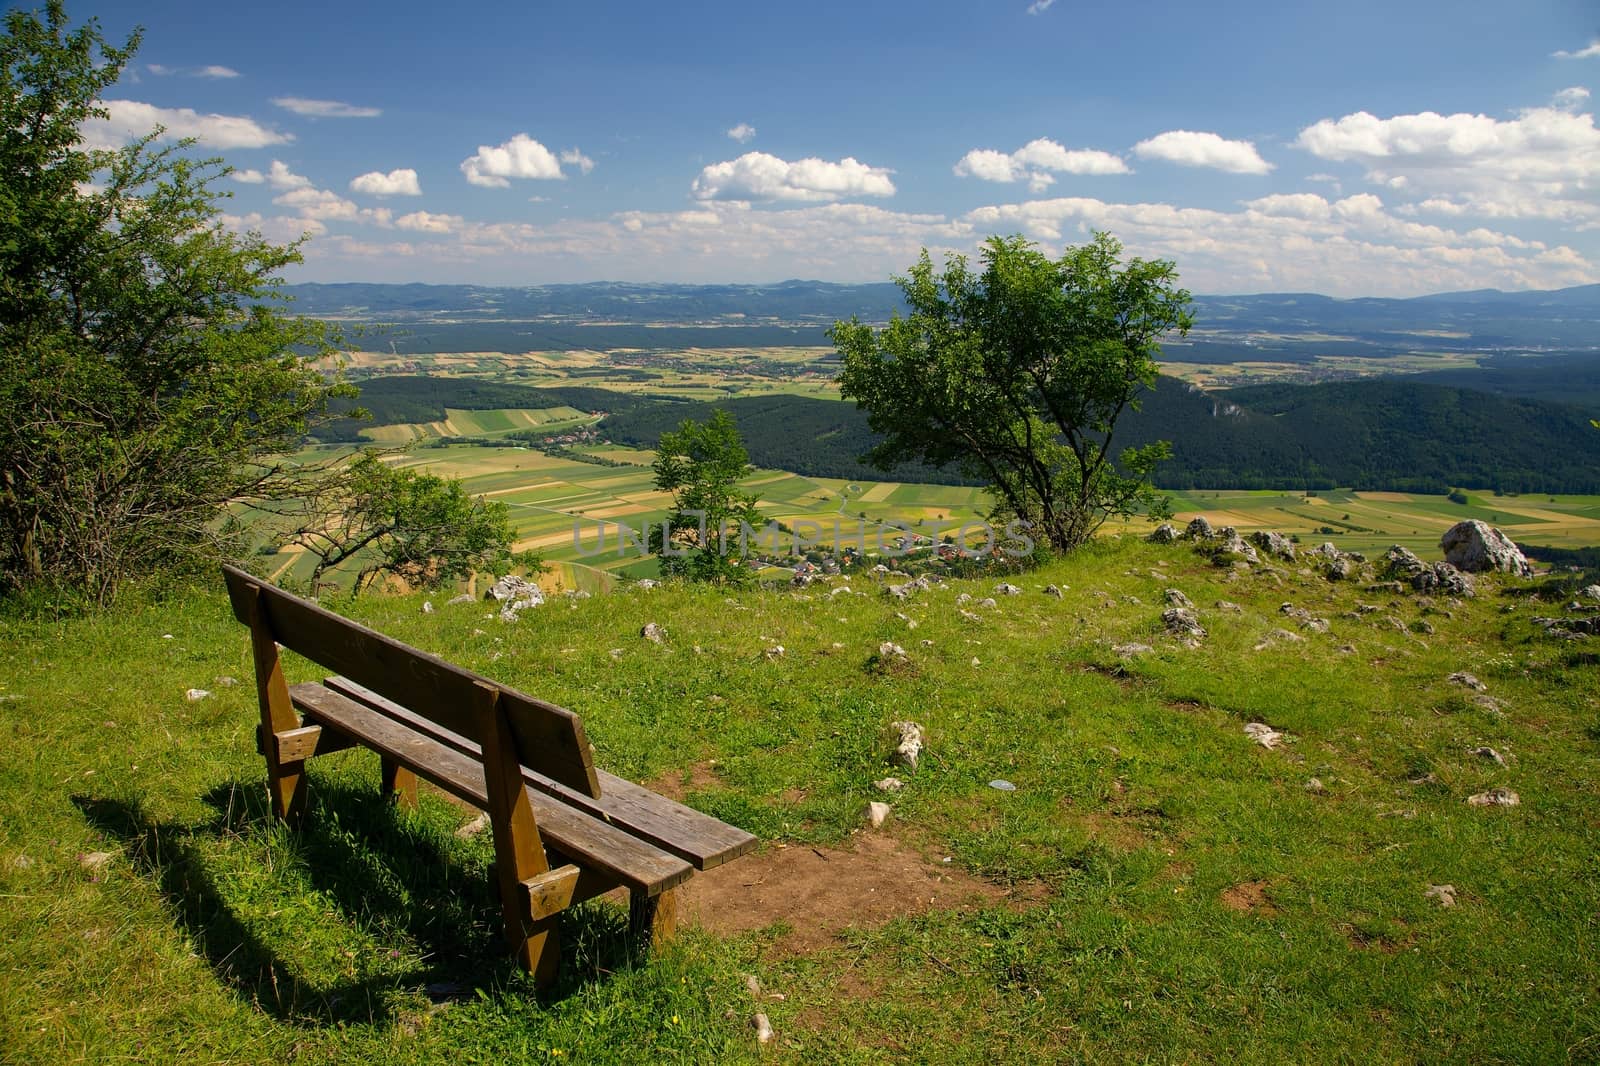 Outdoor bench in a nice mountain area